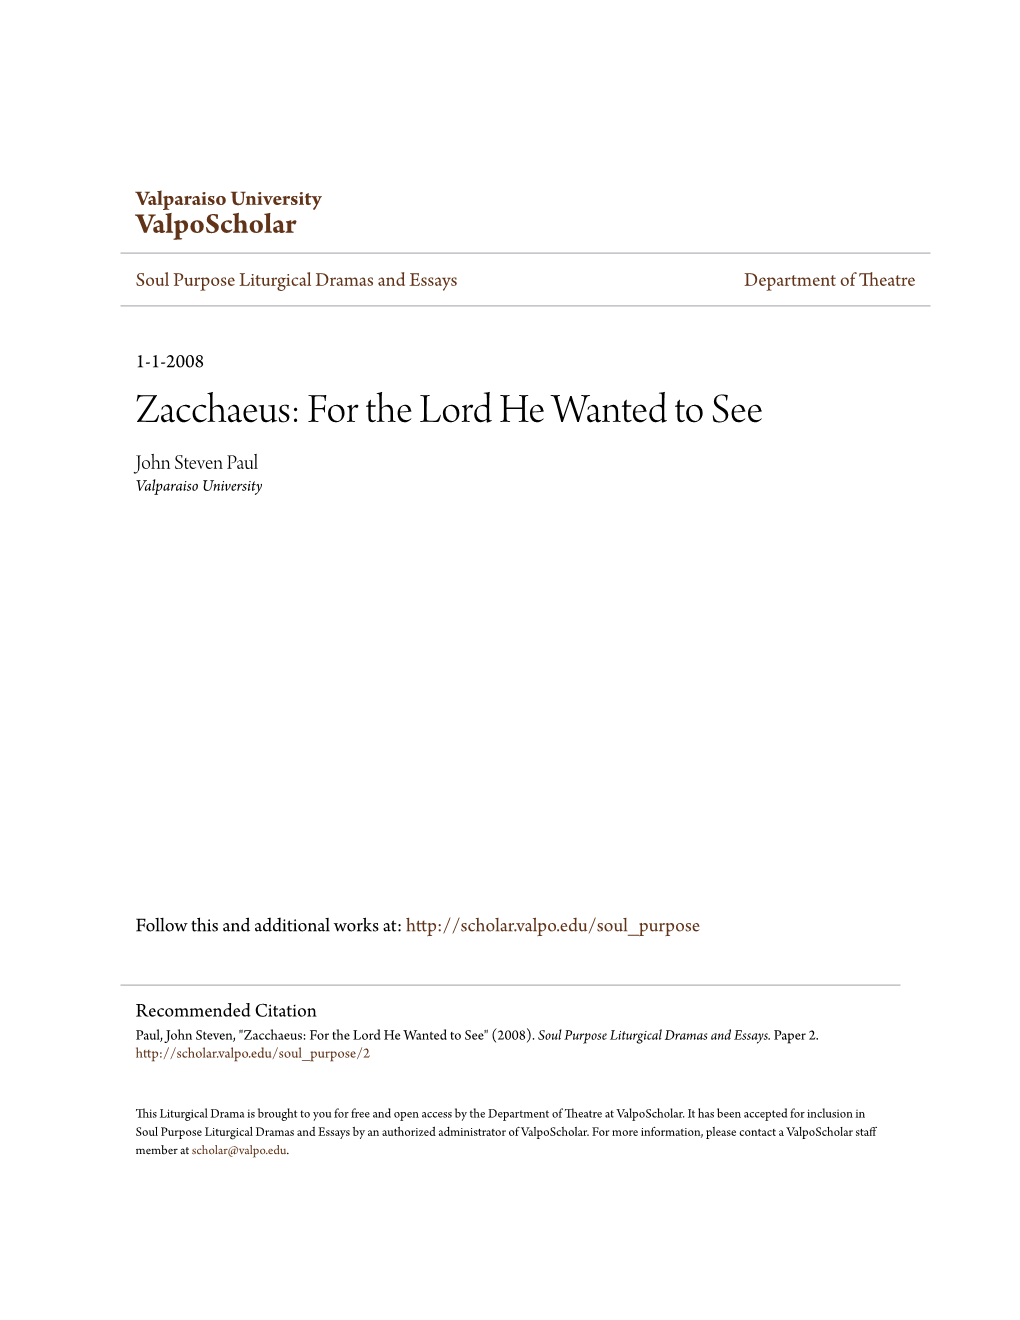 Zacchaeus: for the Lord He Wanted to See John Steven Paul Valparaiso University